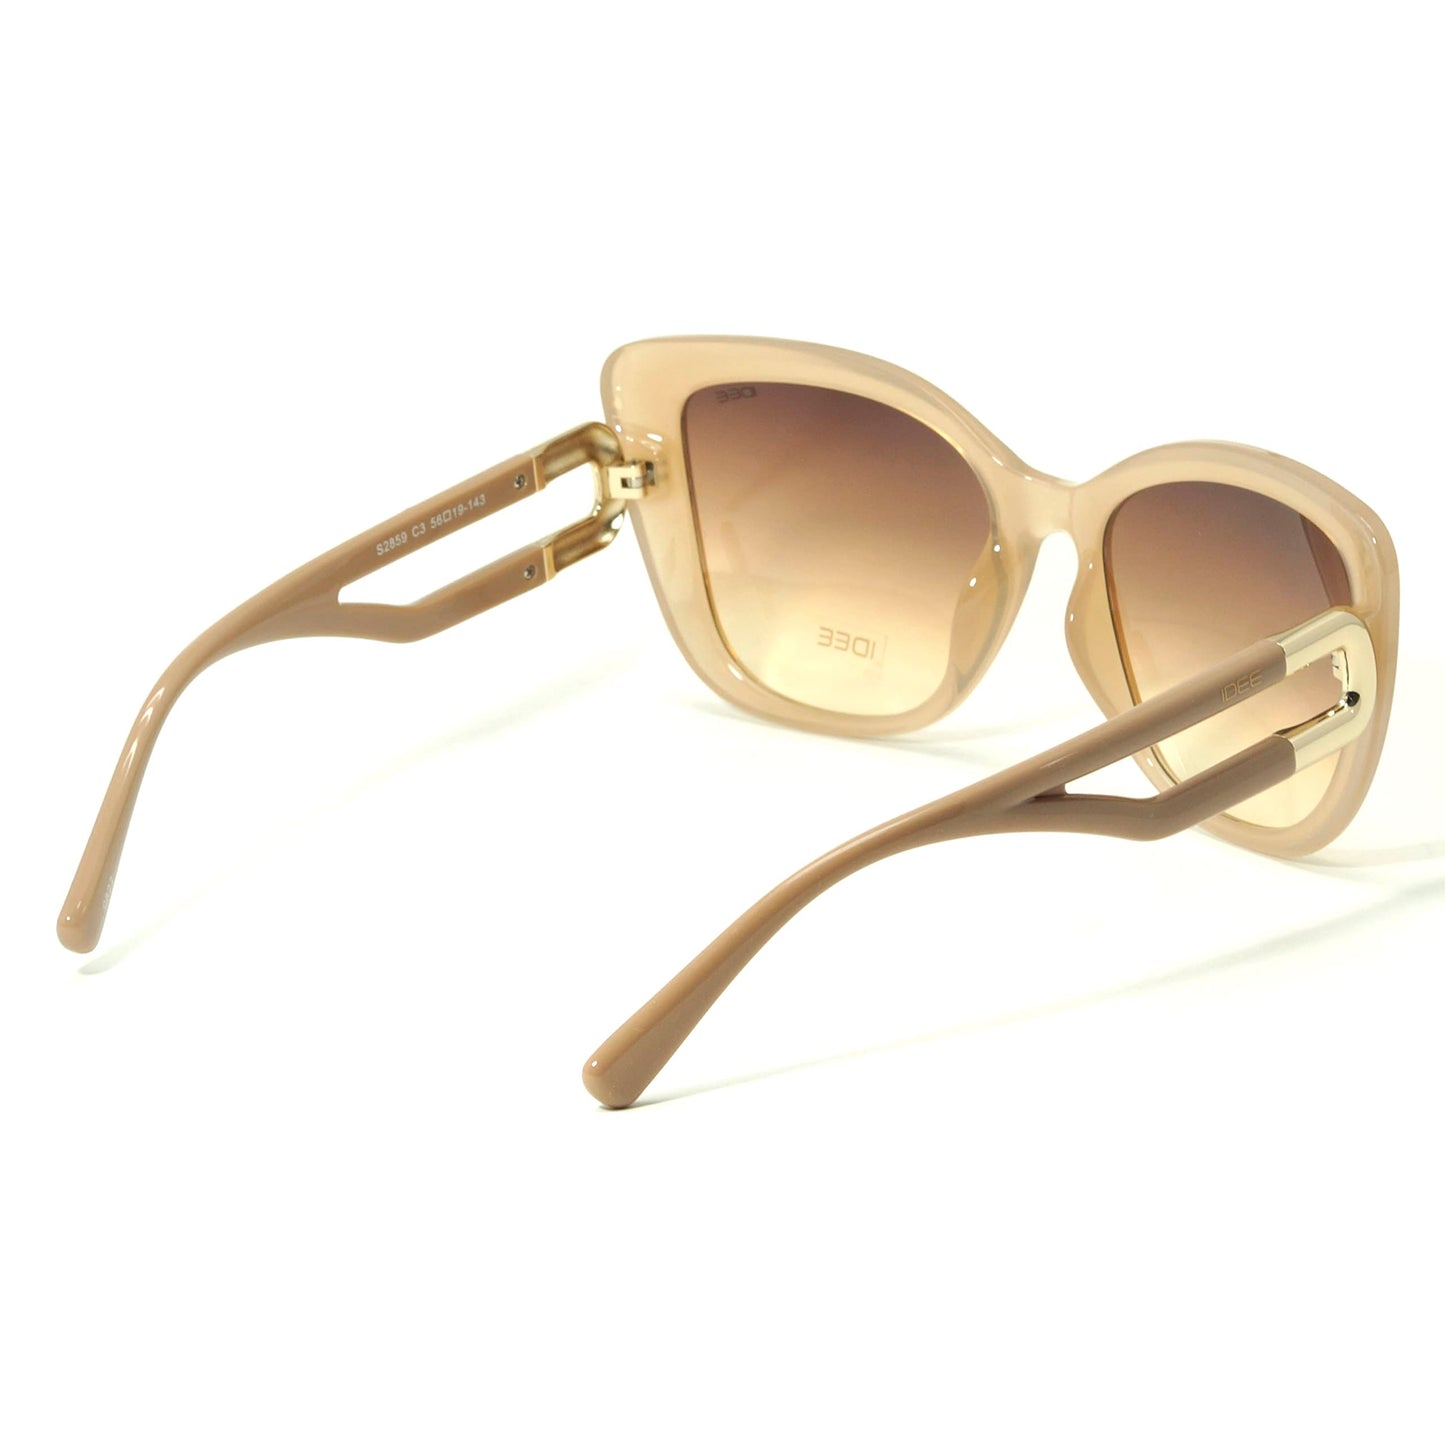 IDEE Butterfly sunglasses IDEE-S2859-C3 Large Light Brown sunglasses for Women